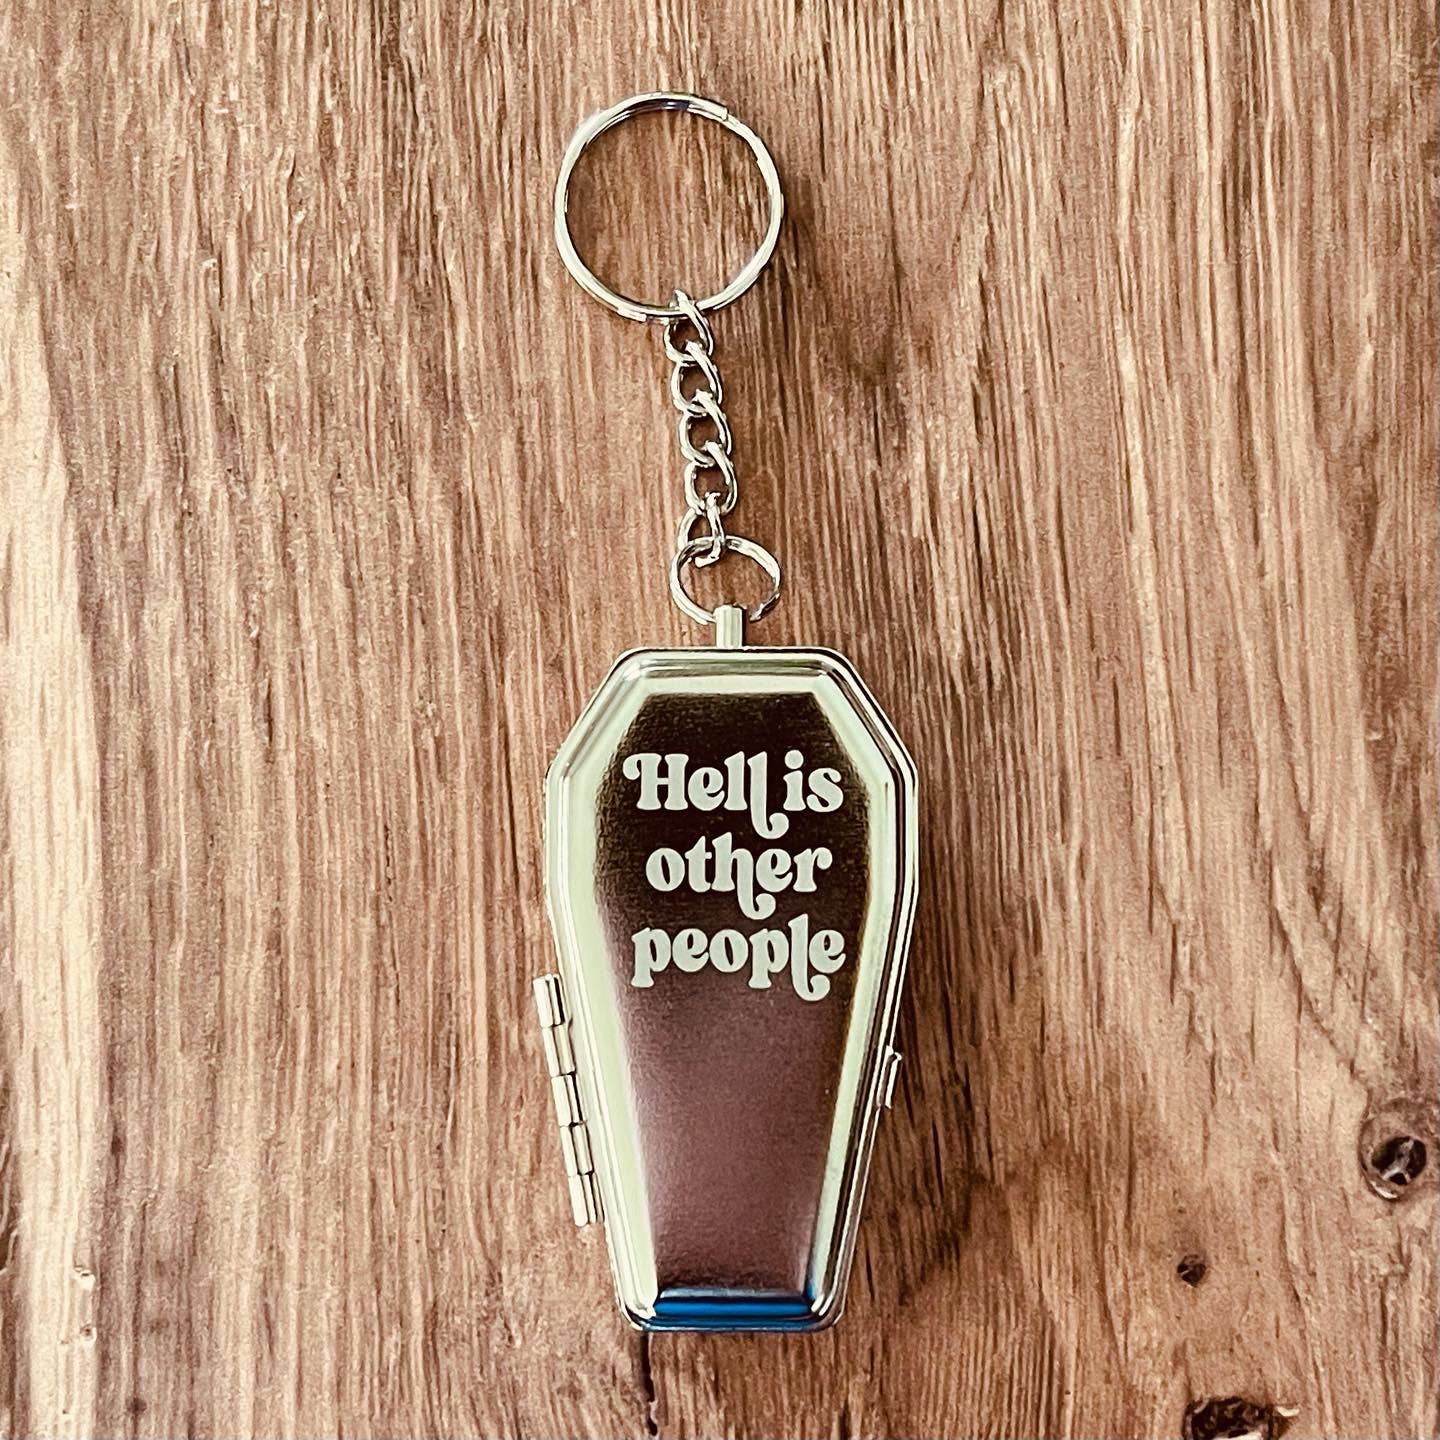 Sartre Hell is Other People coffin Ashtray keychain Engraved